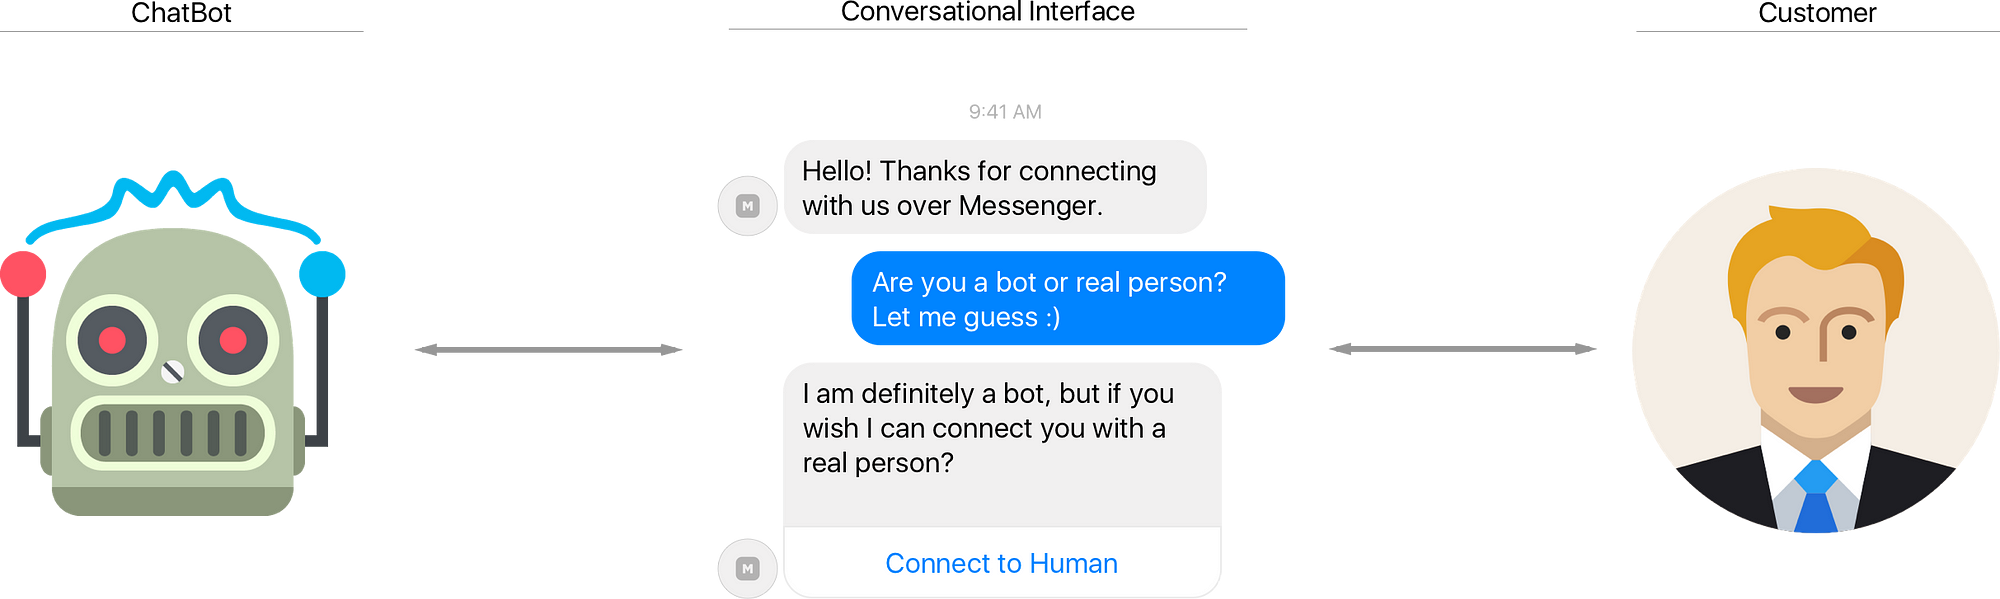 Conversational Interfaces Breakthroughs And Use Cases For Building ChatBots? | by Elia | Chatbots Magazine